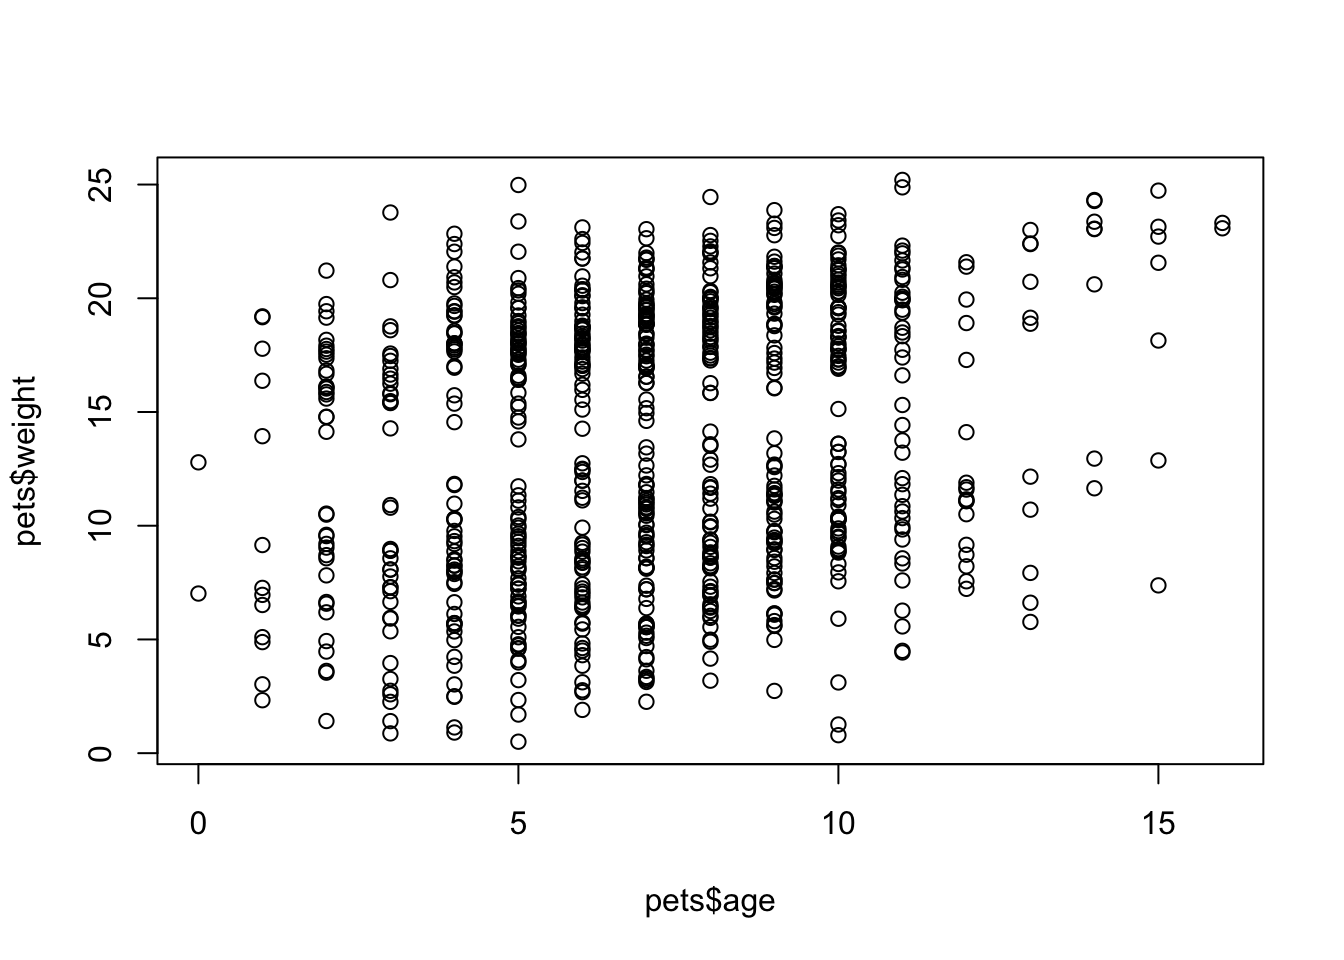 plot() with continuous x and y